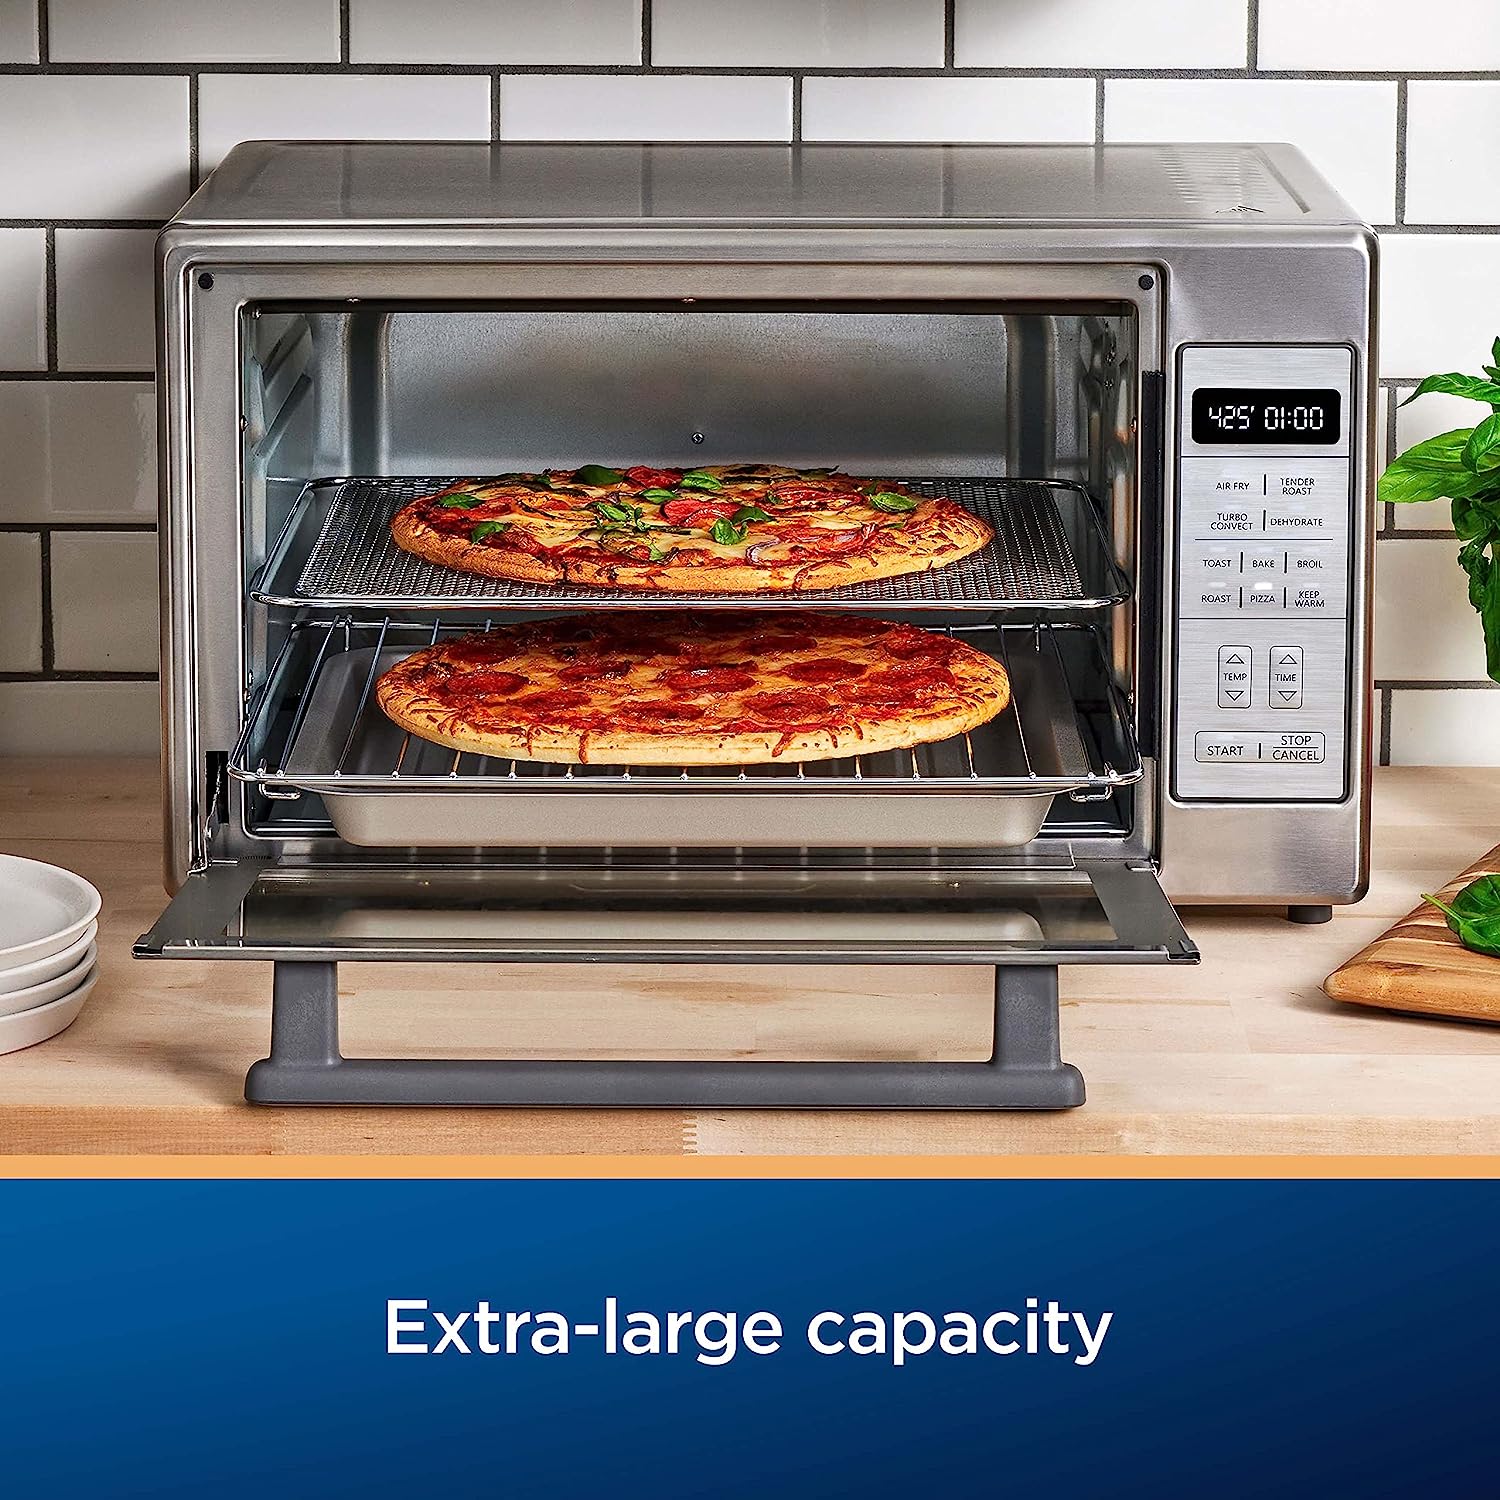 https://bigbigmart.com/wp-content/uploads/2023/06/Oster-Air-Fryer-Oven-10-in-1-Countertop-Toaster-Oven-Air-Fryer-Combo-10.5-x-13-Fits-2-Large-Pizzas-Stainless-Steel1.jpg